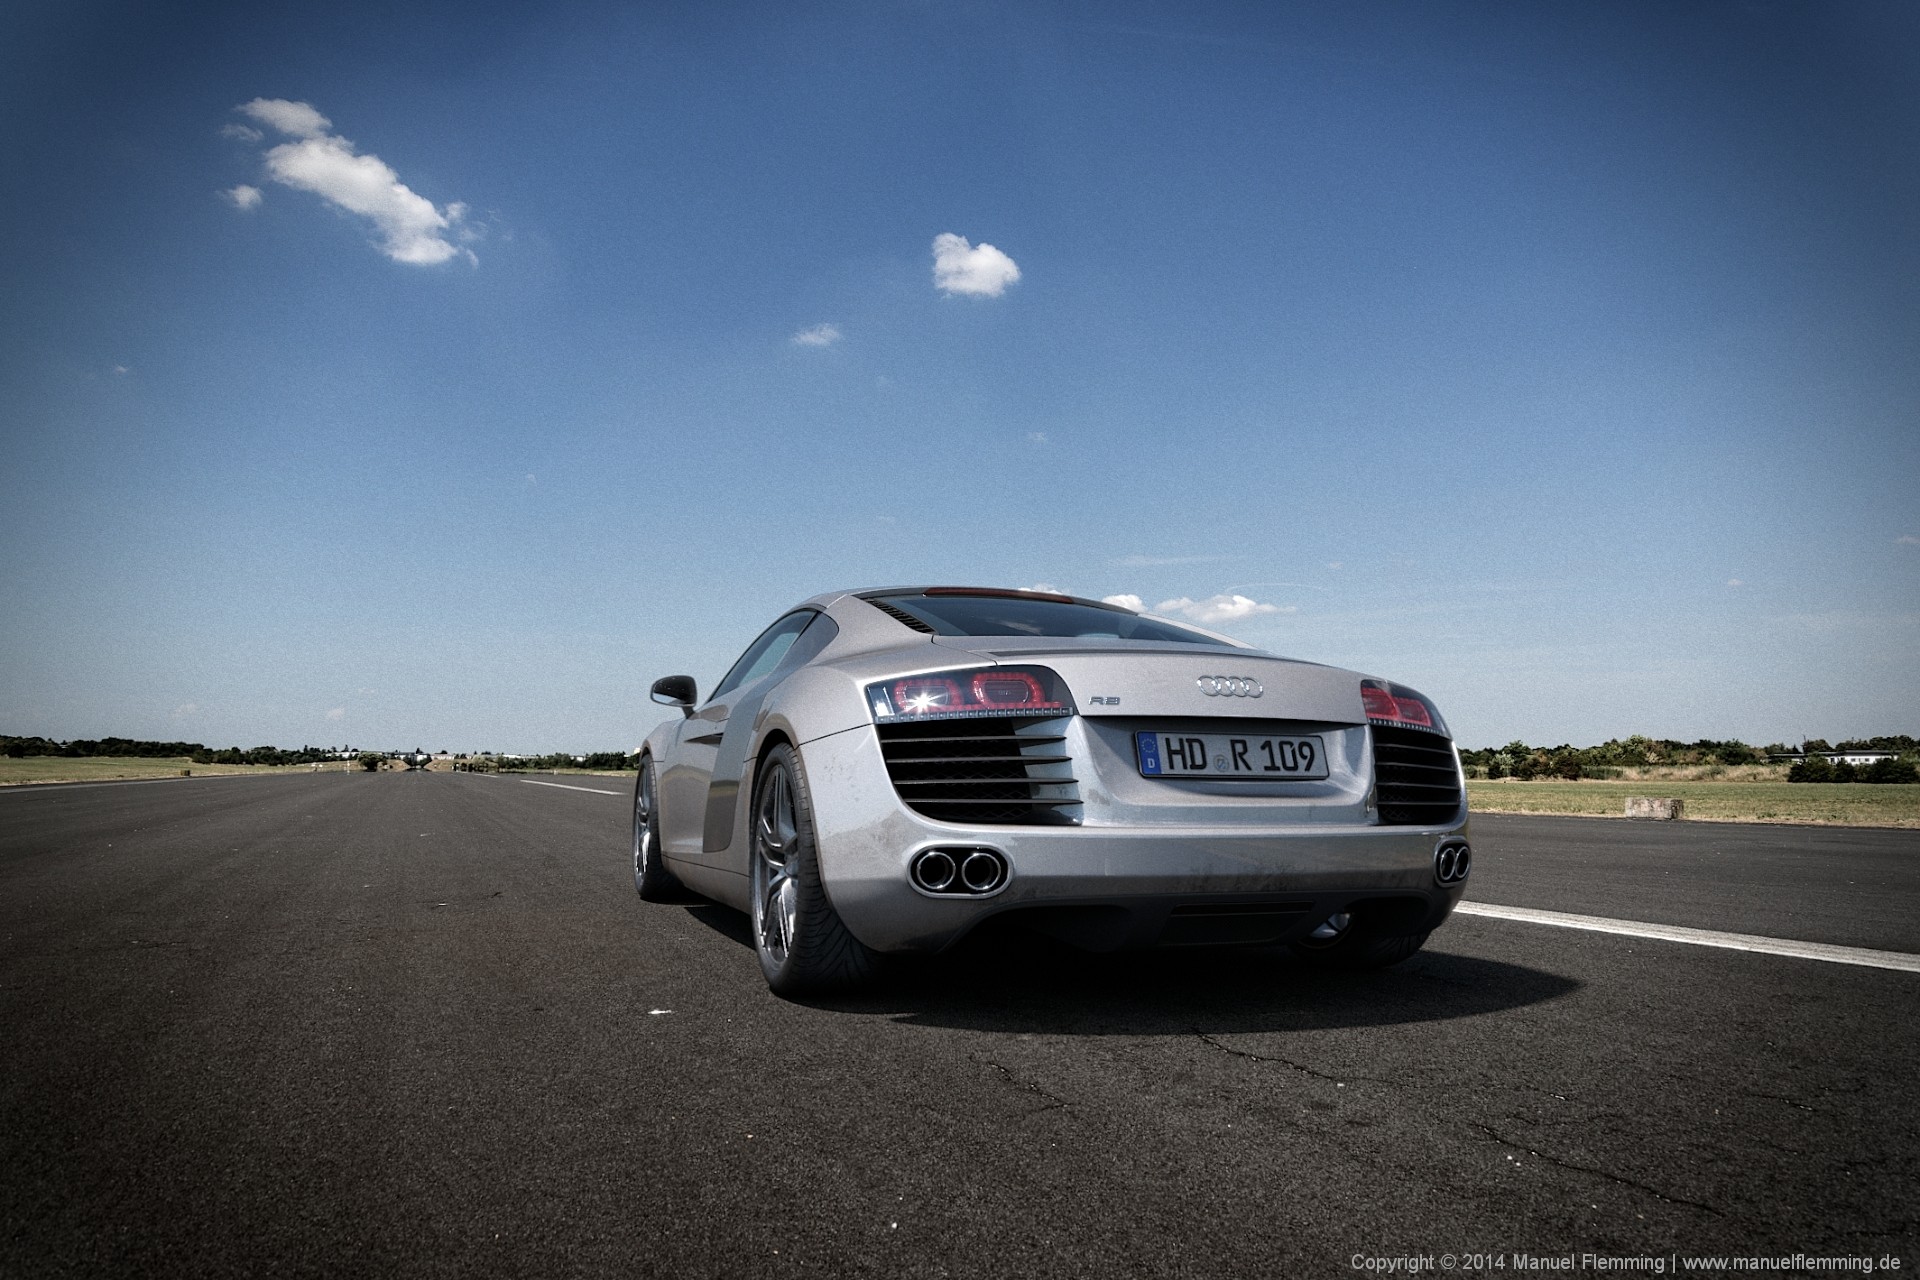 A rendering of an Audi R8 at Airstrip 01 - created using Maya, Mari, Vray and Nuke. I'm responsible for HDRI & Plate photography, texturing, shading, lighting, rendering and compositing.